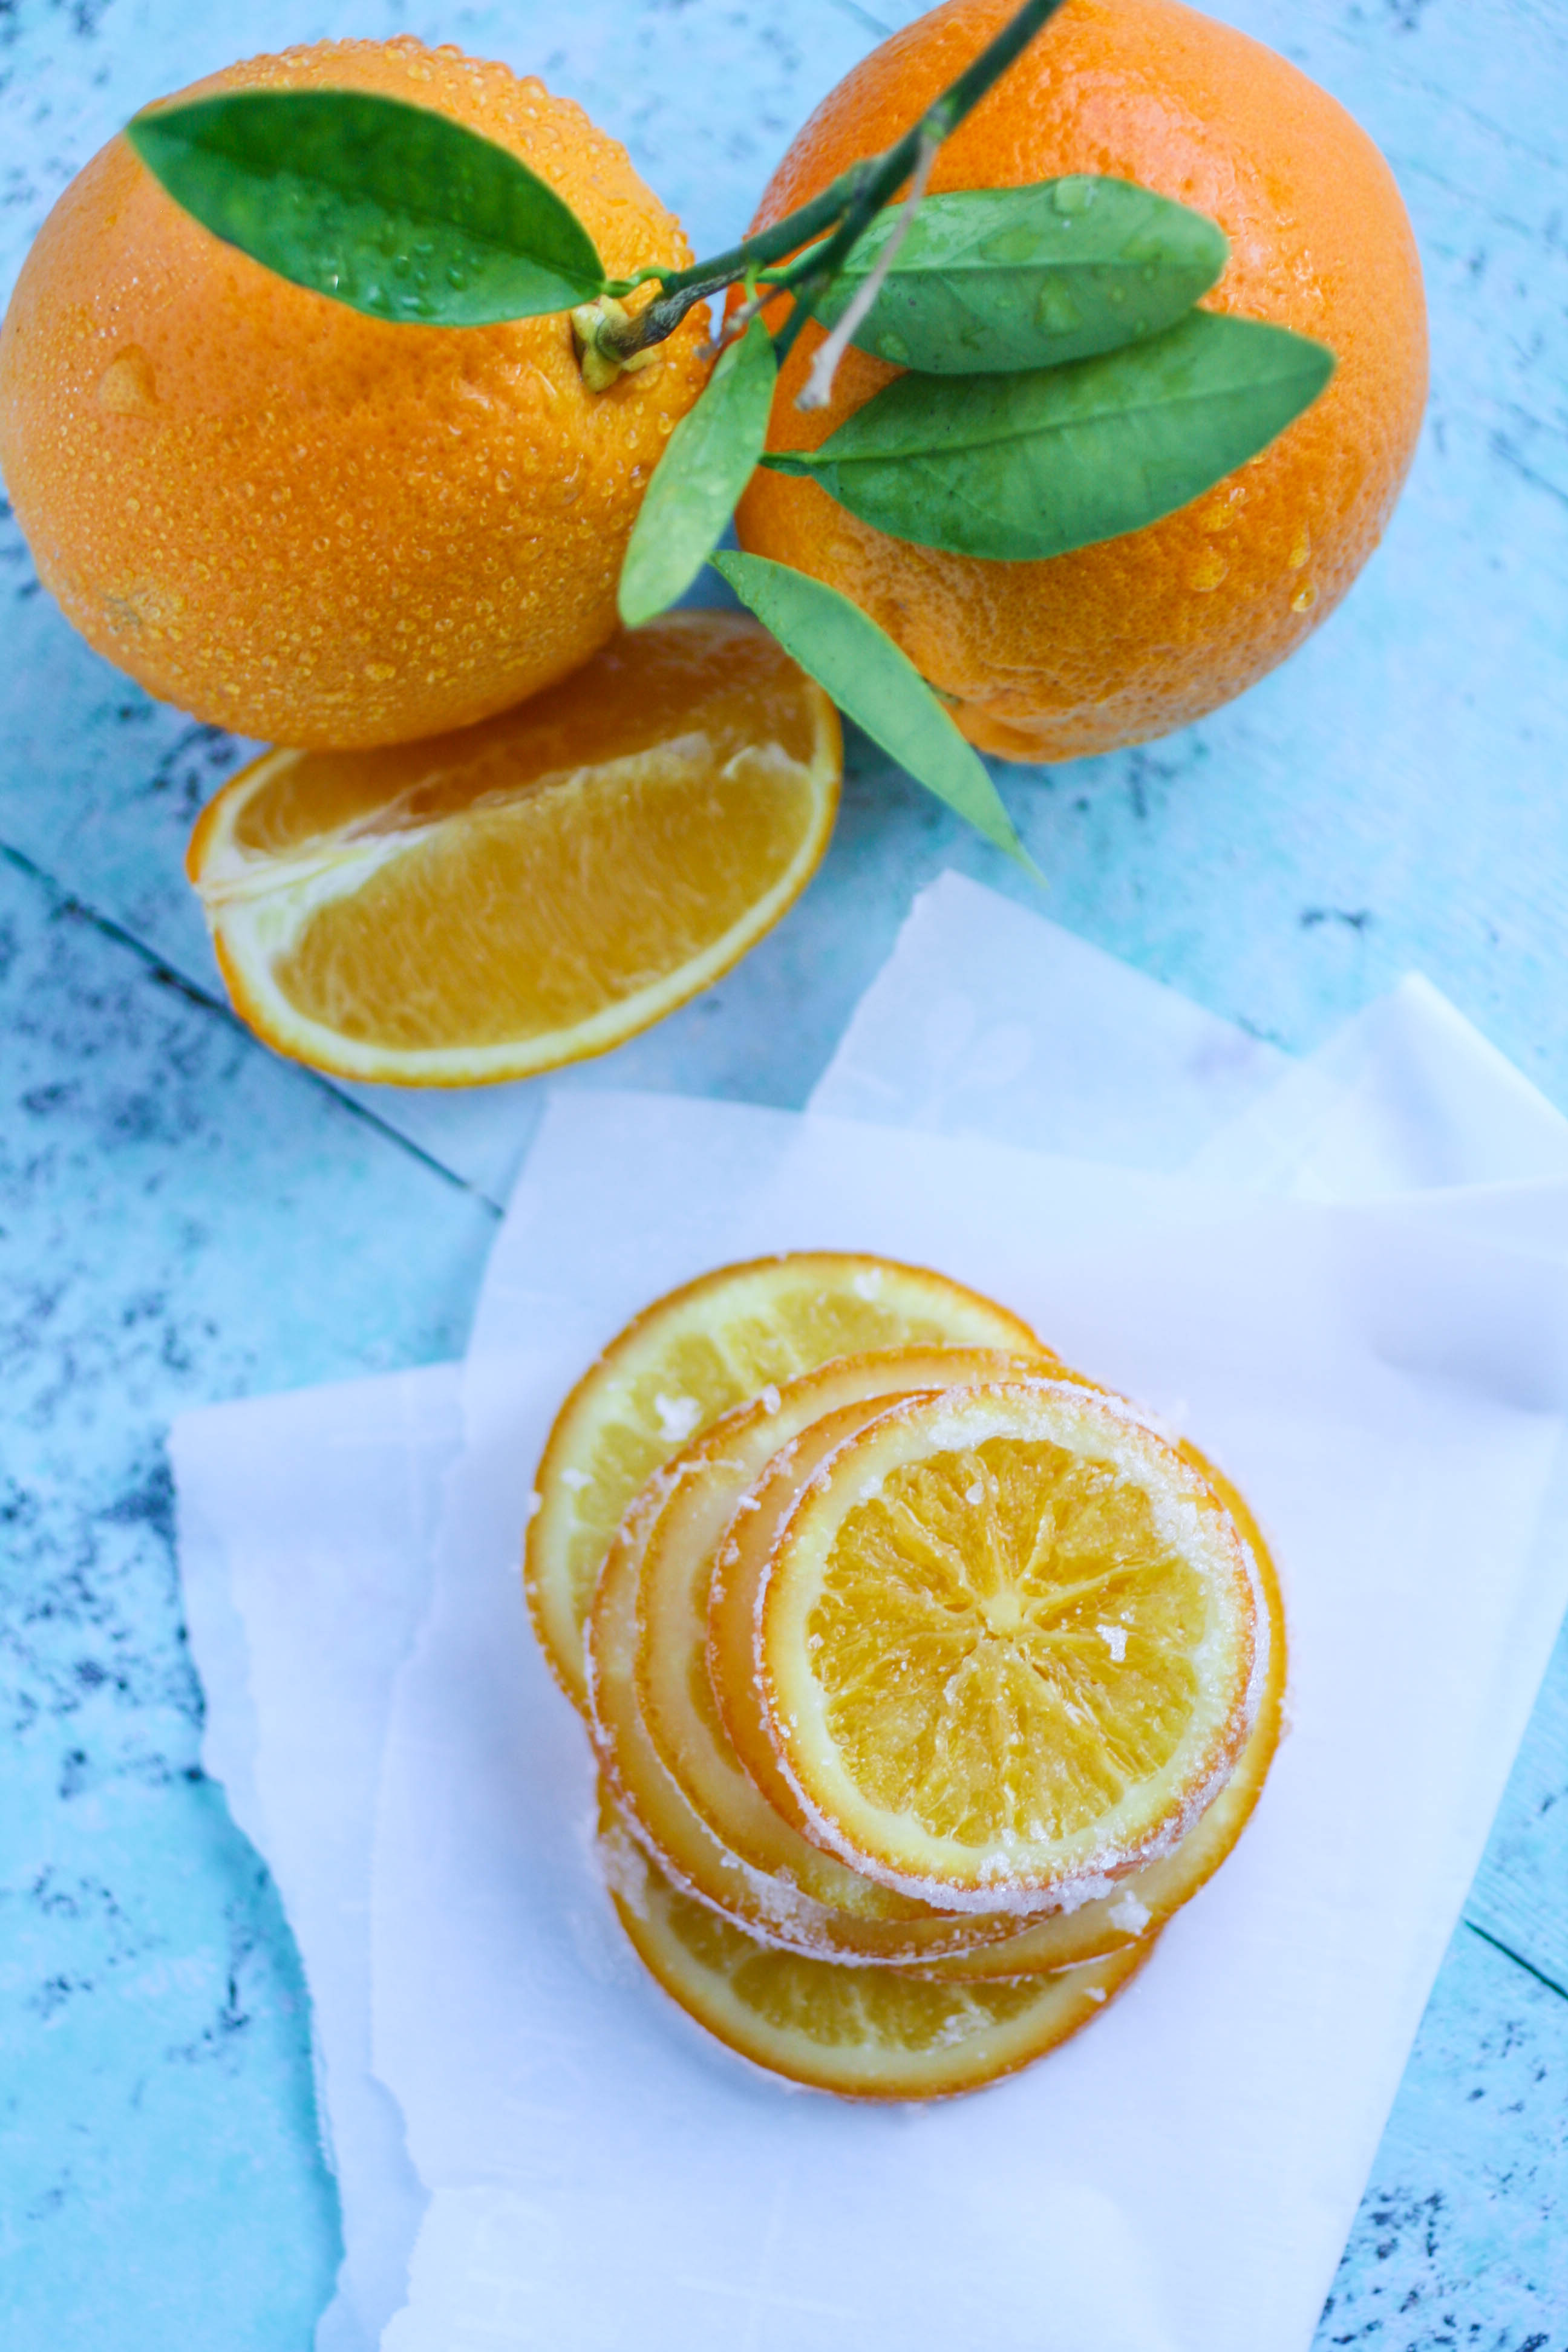 Candied Orange Slices are a lovely and bright treat for any day. You'll love these candied oranges for a special treat.